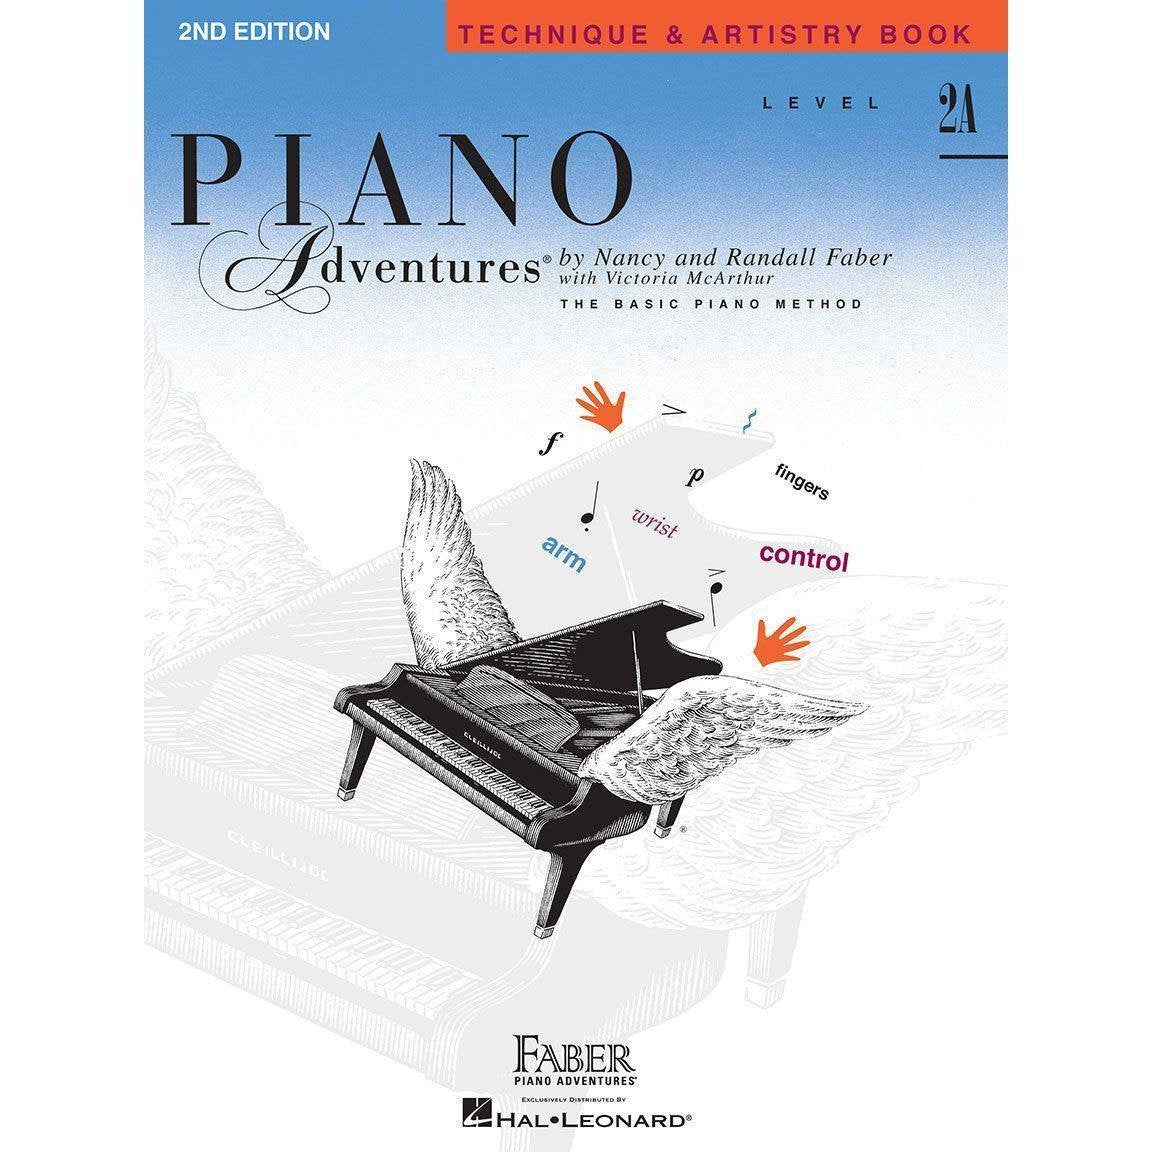 Faber Piano Adventures-2A-Tech & Artistry-Andy's Music